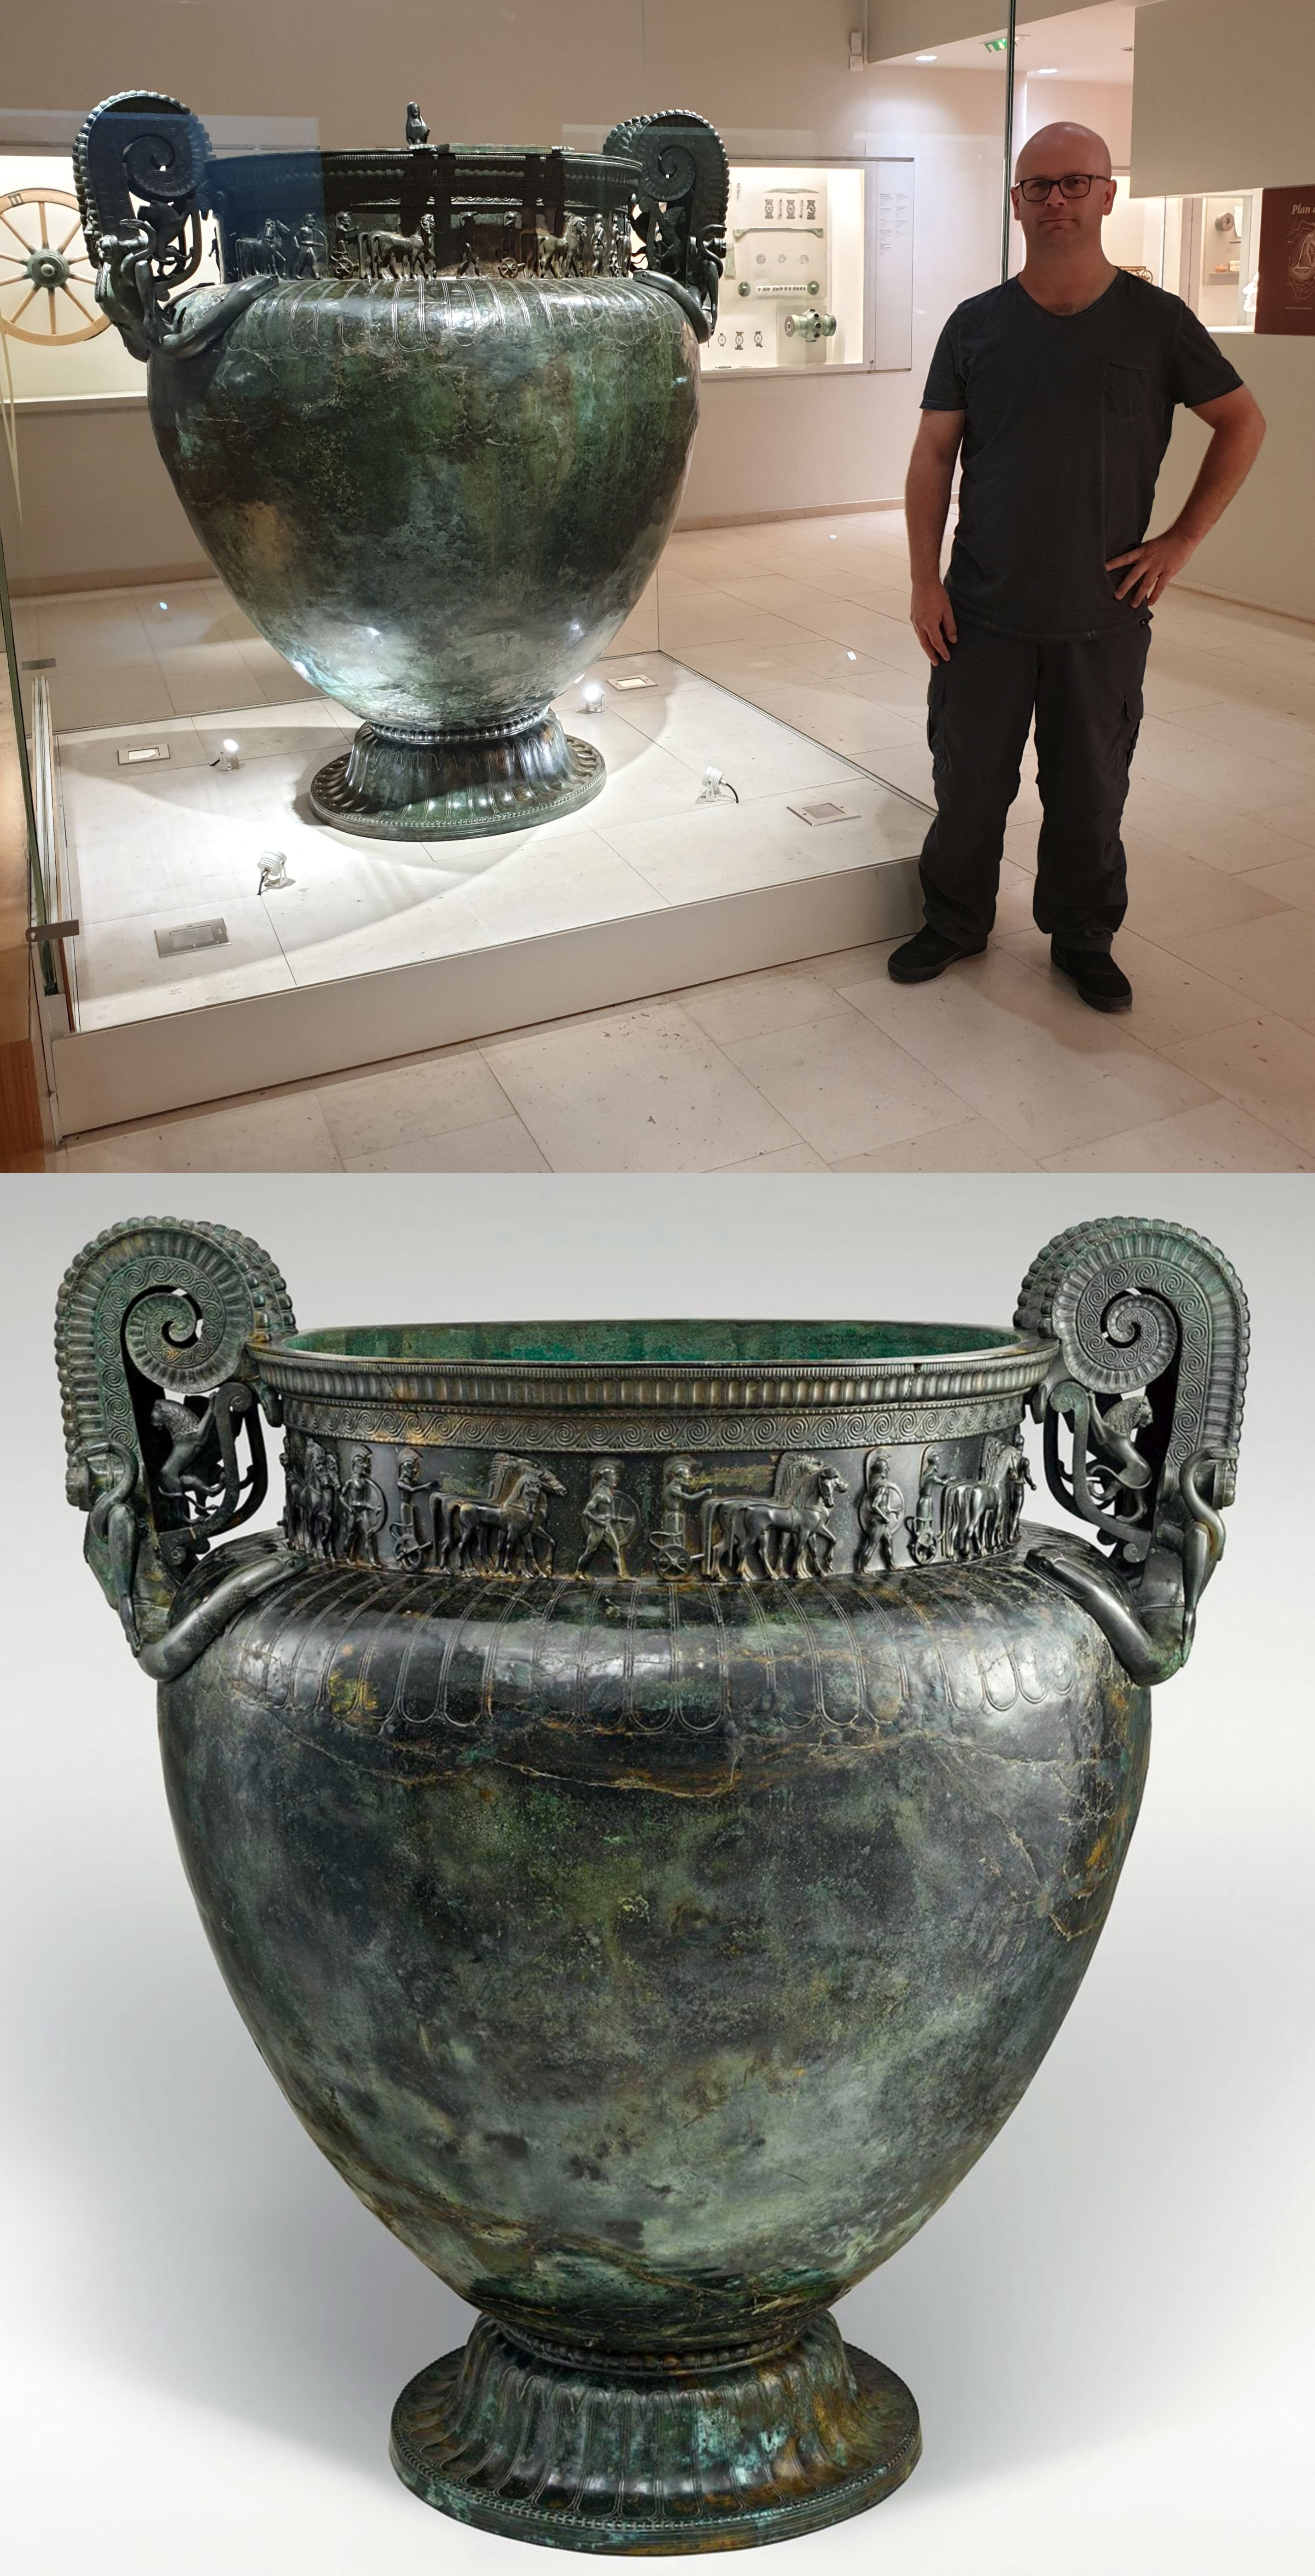 The Vix Krater is an imported Greek wine-mixing vessel found in the Celtic grave of the Lady of Vix in northern Burgundy, France. Made of bronze and dating back to ca. 500 BC.jpg